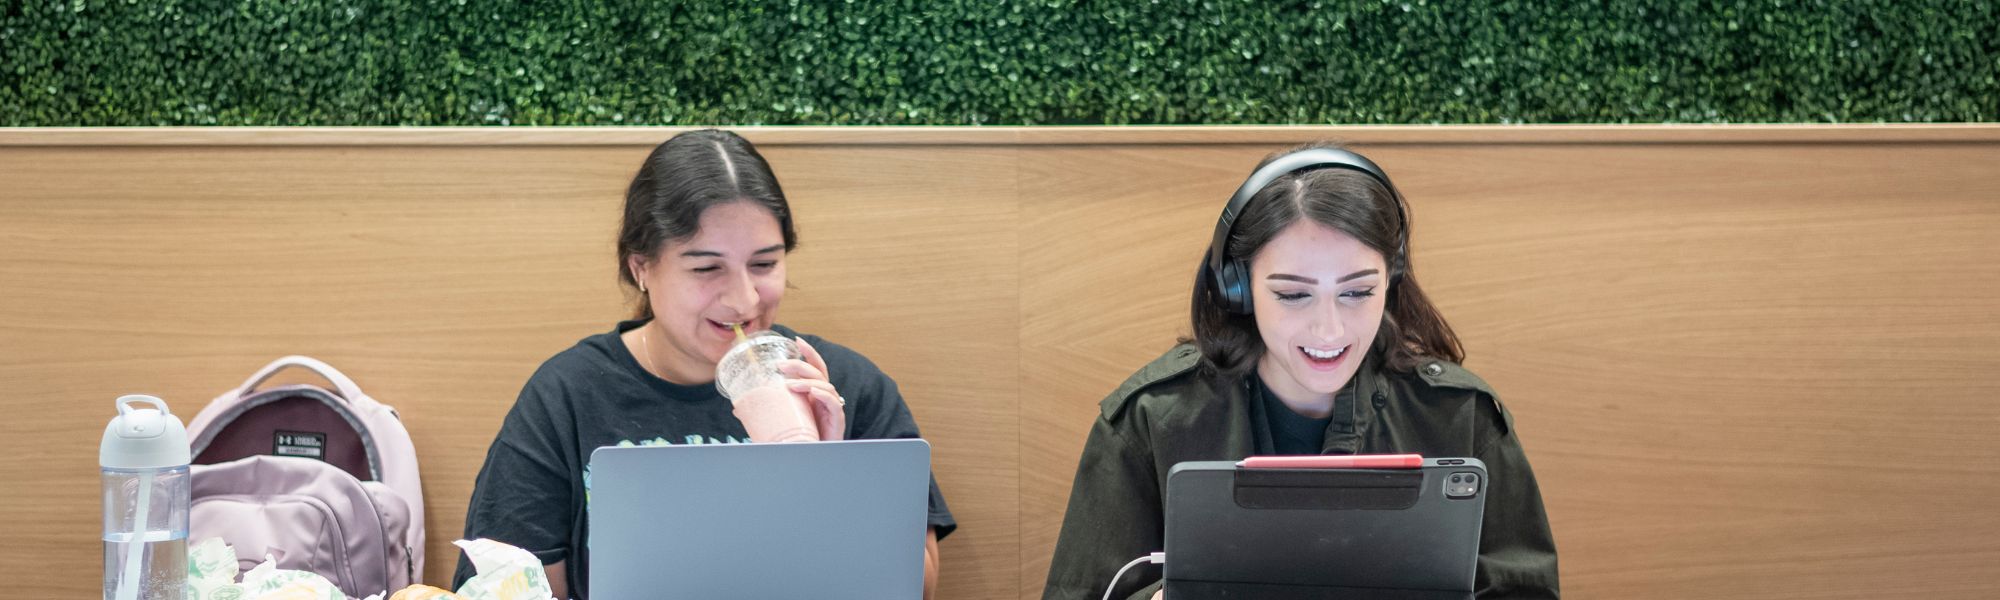 Two students studying in the student union.